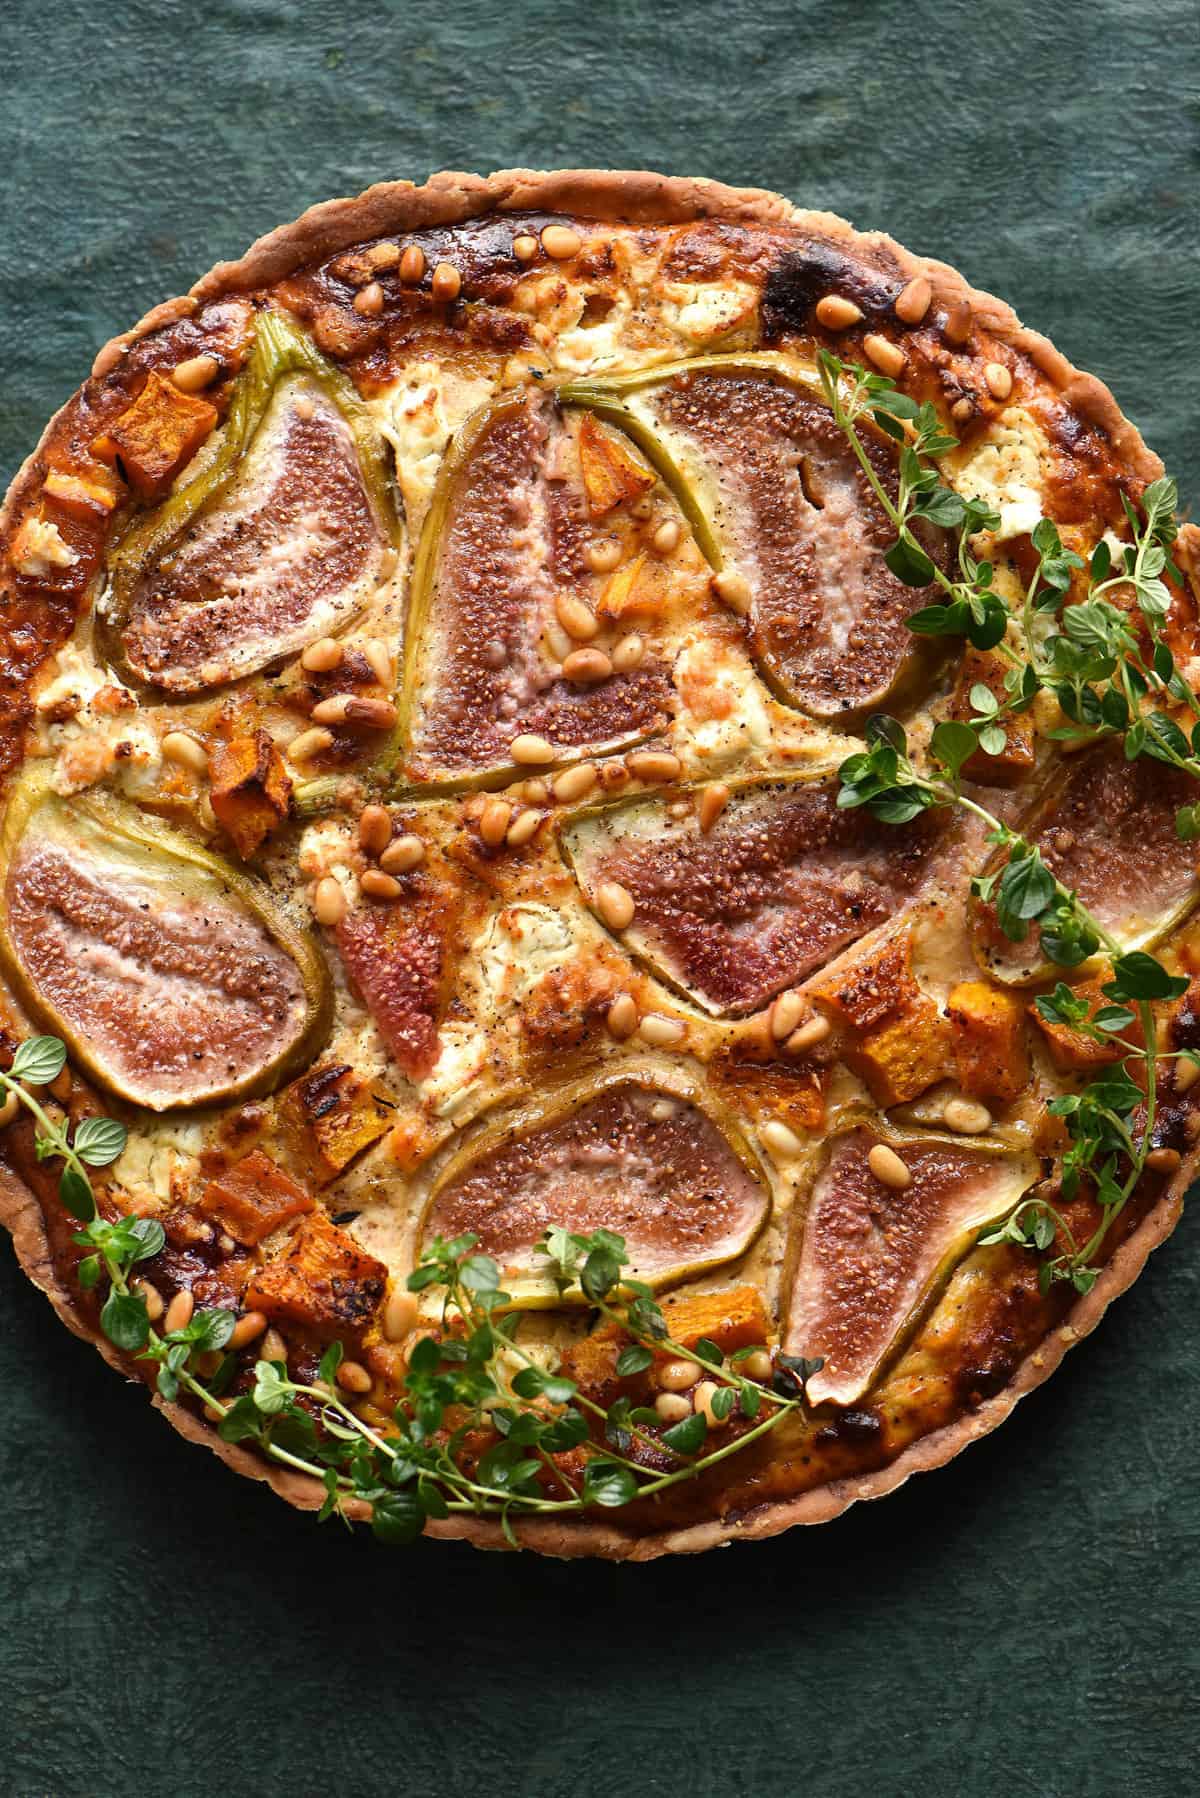 Savoury fig tart with roasted pumpkin, goats cheese and herbs, all encompassed in a gluten free/grain free or nut free pastry. Recipe from www.georgeats.com